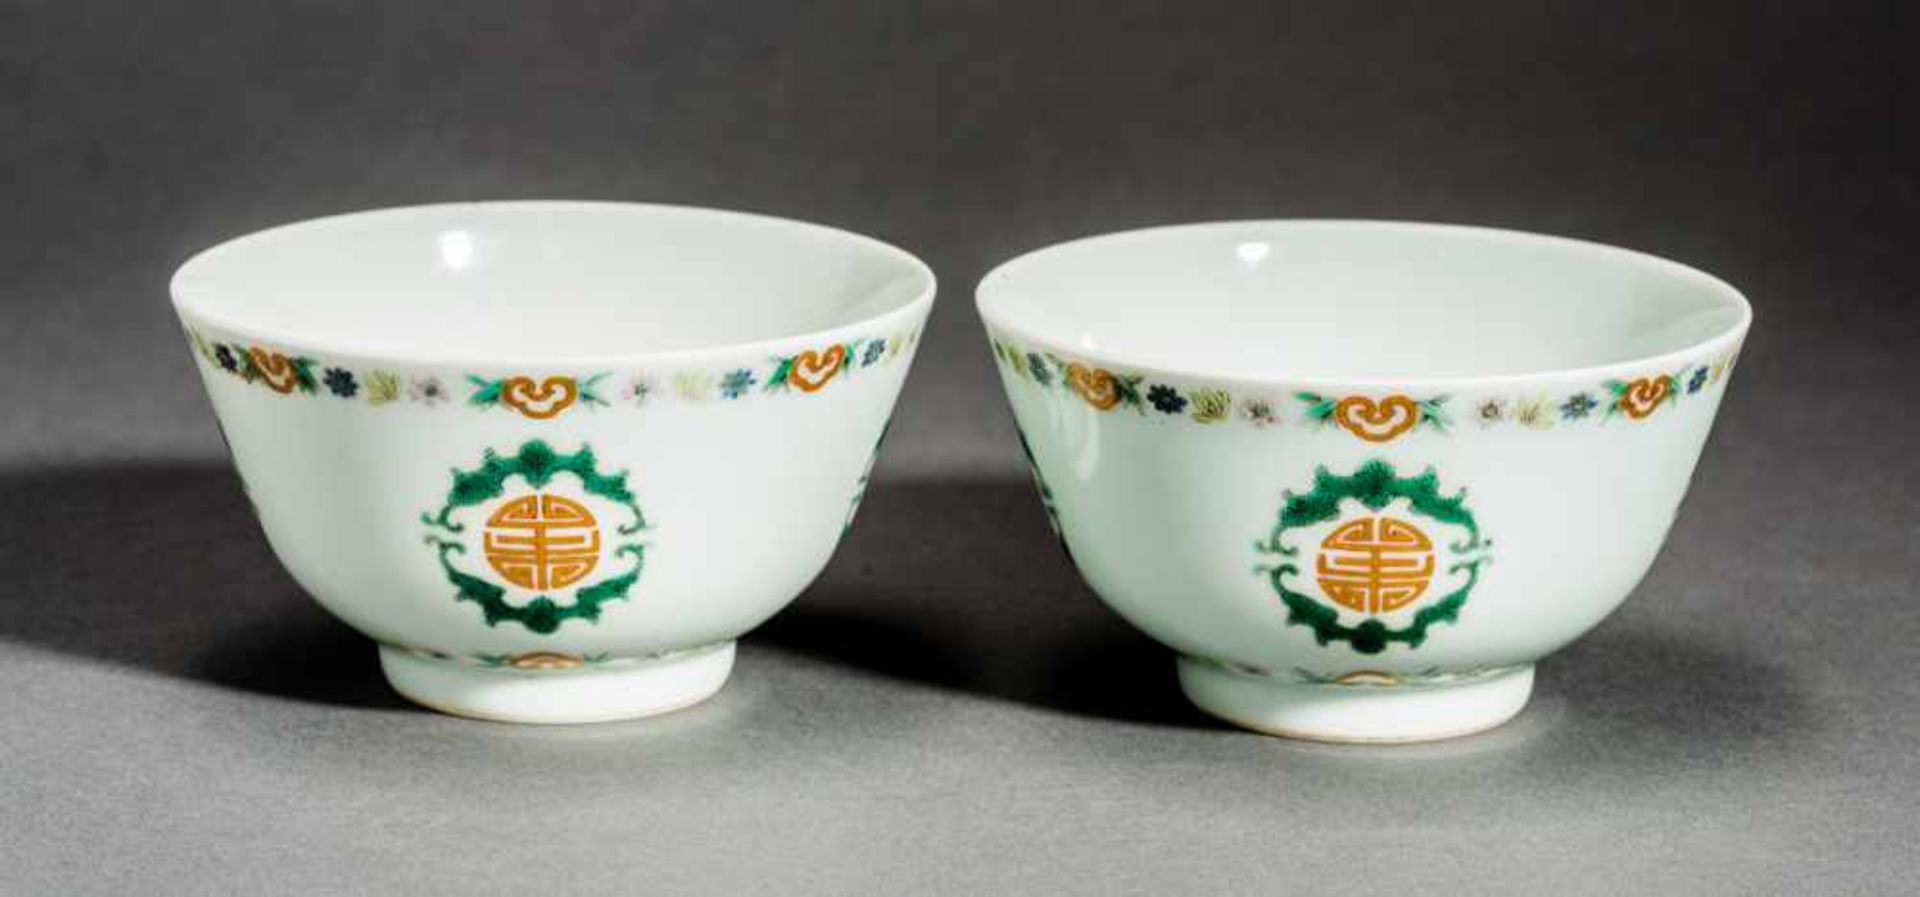 PAIR OF BOWLS WITH SHOU AND RUYI Porcelain with enamel paint andgold. China, Qing dynasty, seal